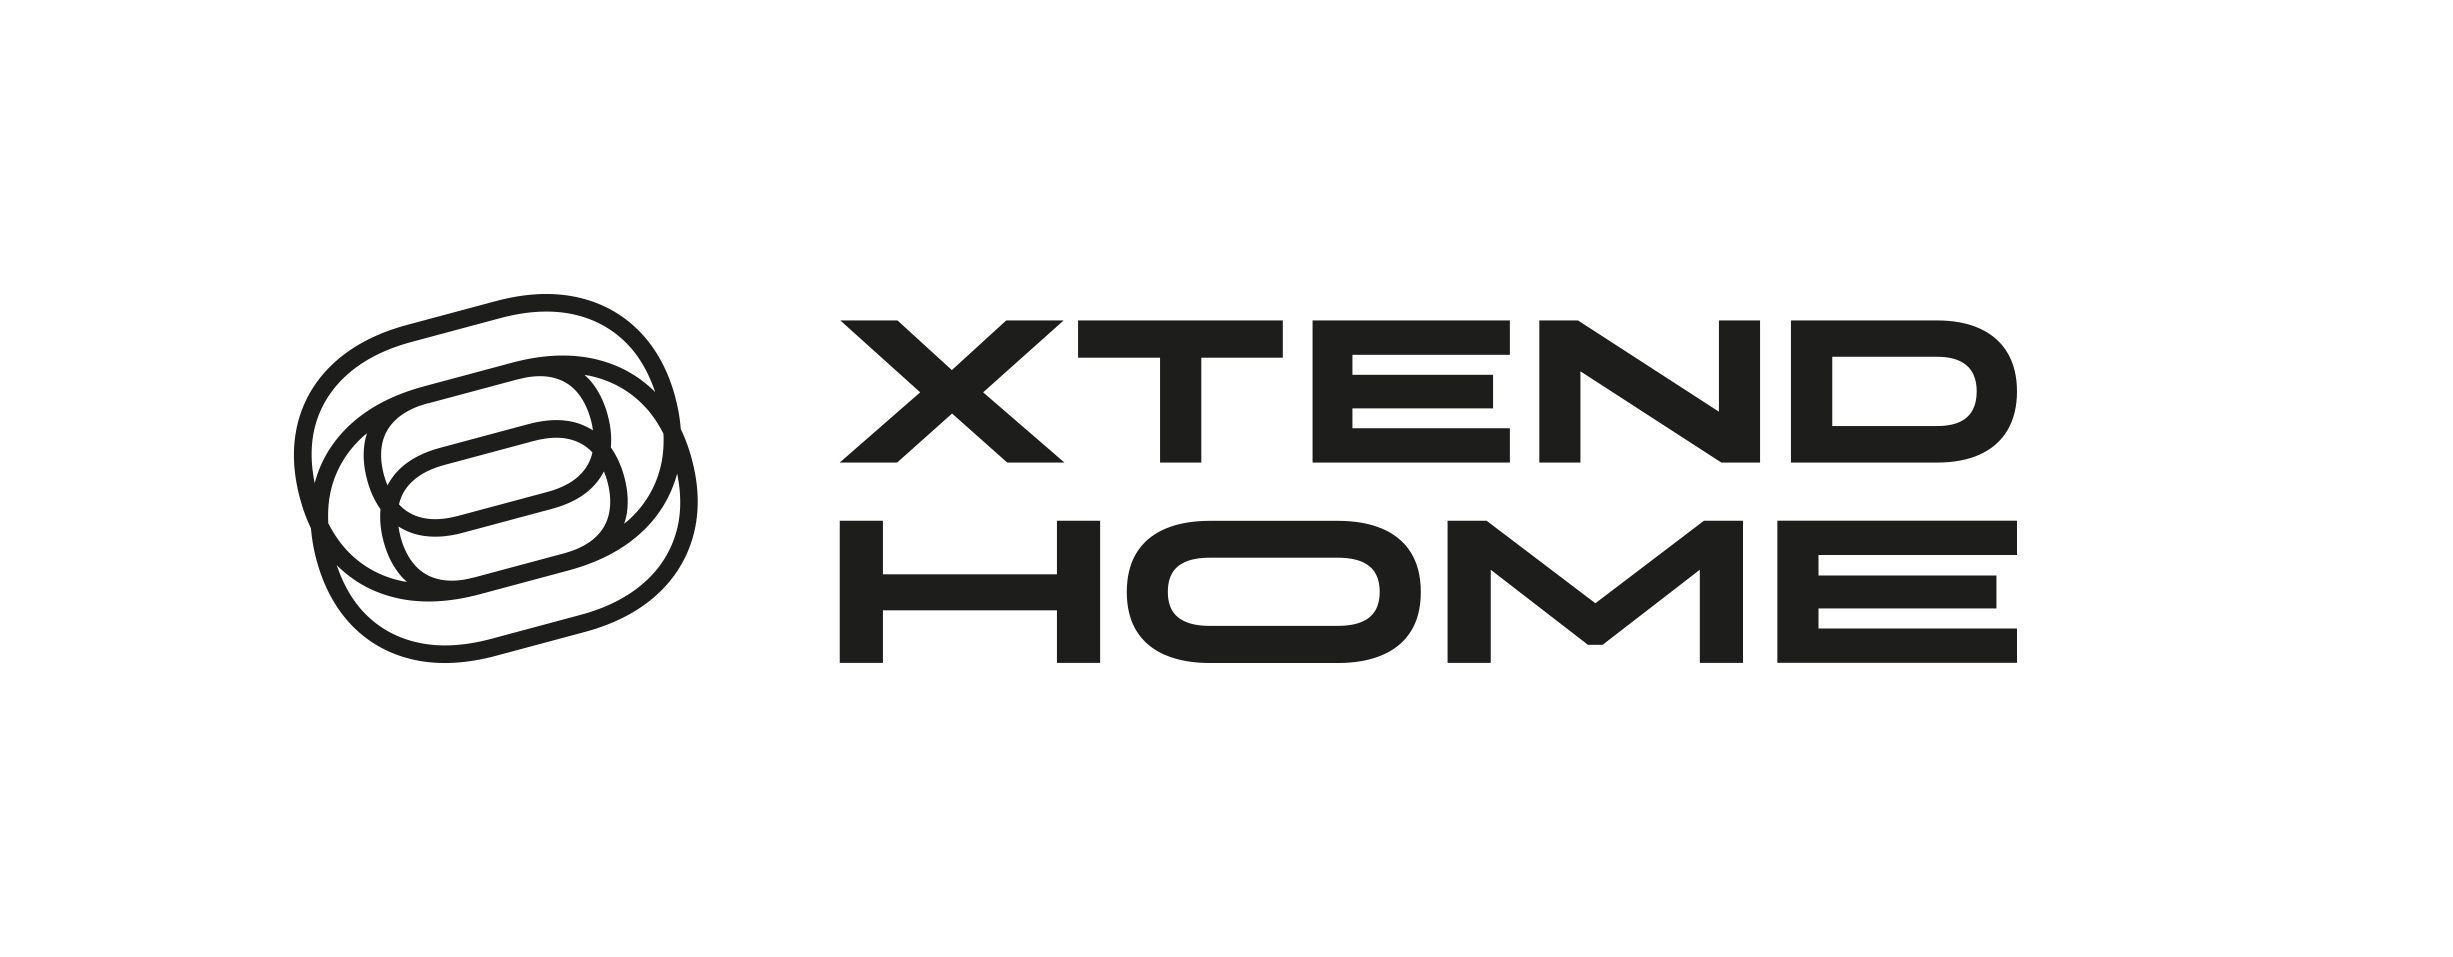 Xtend Home